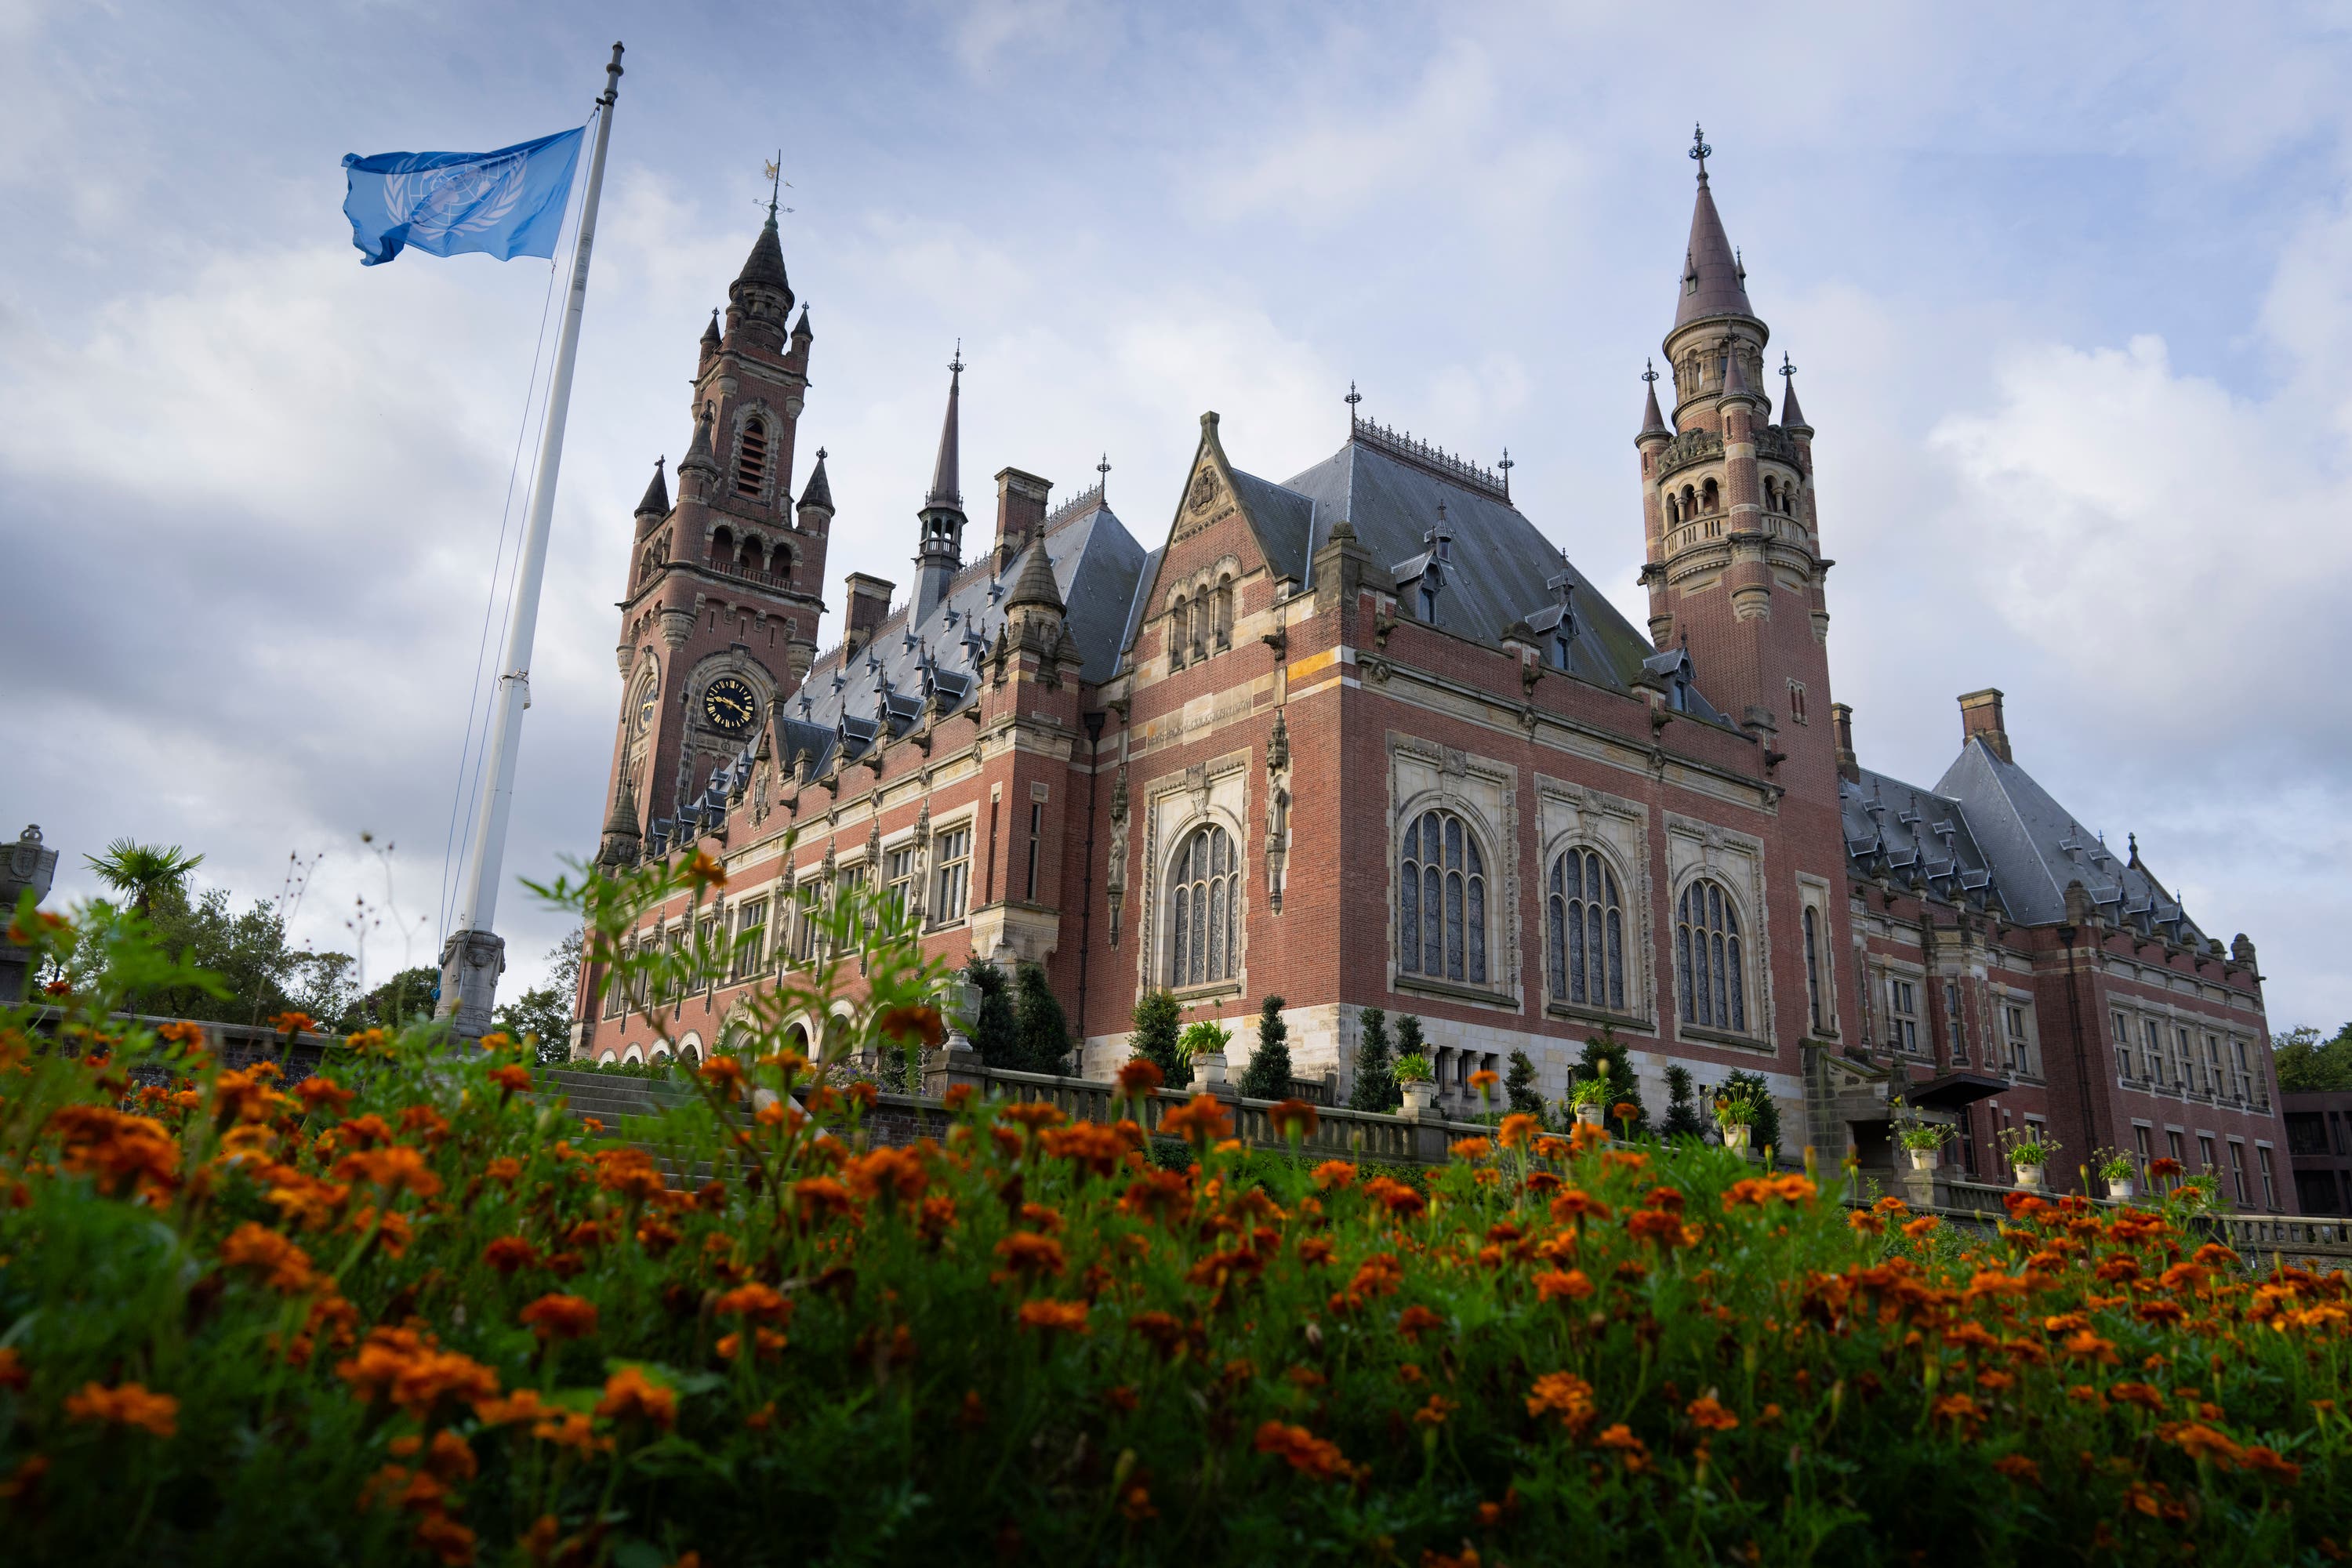 The Peace Palace which houses World Court at The Hague in the Netherlands where South Africa has launched a case accusing Israel of genocide in Gaza.